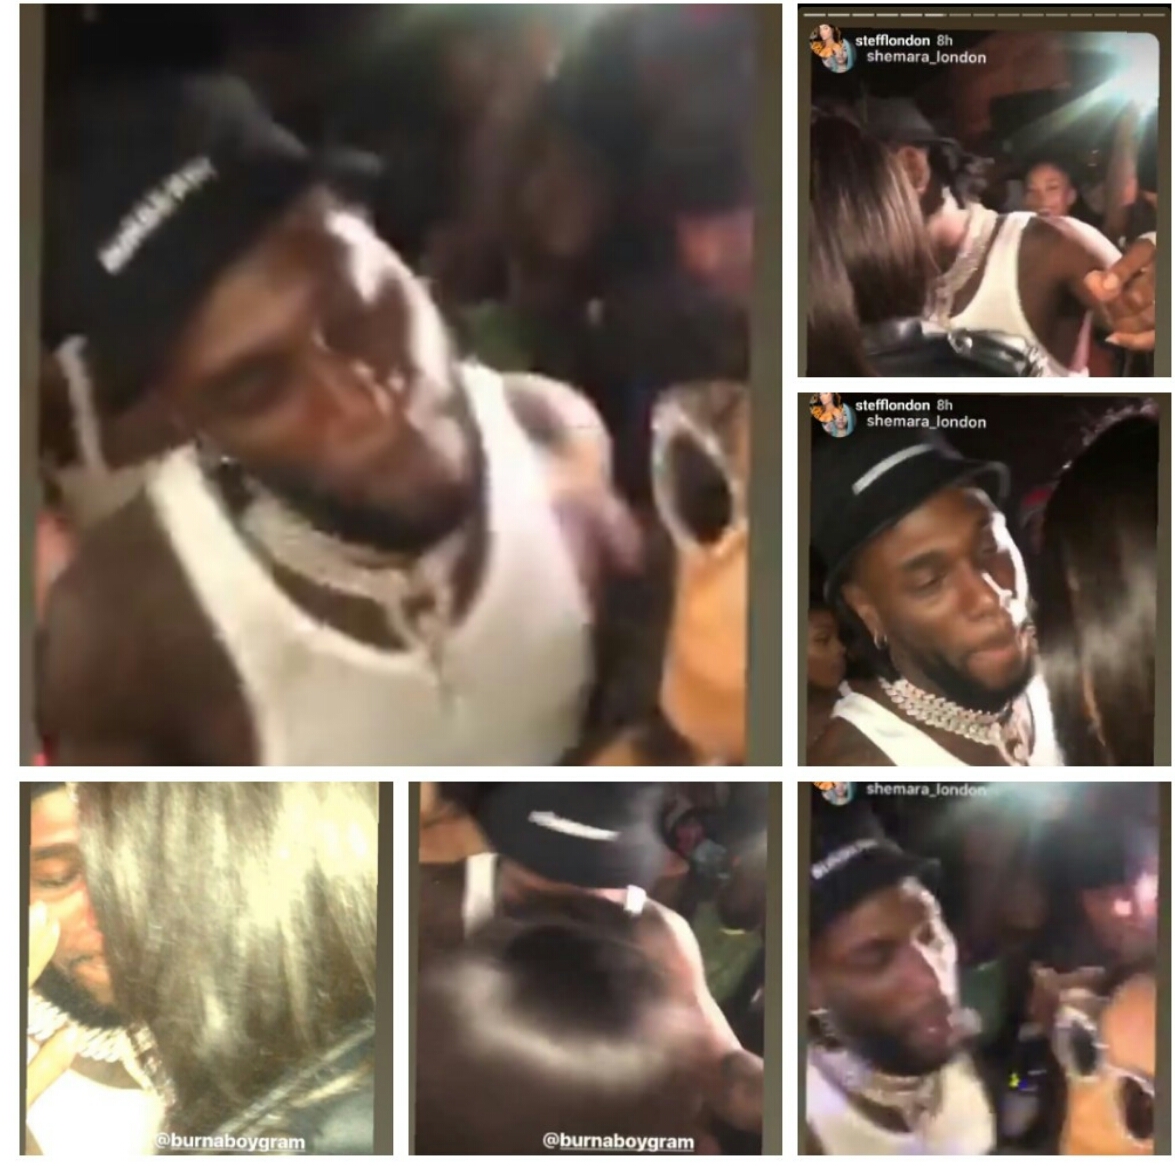 Burna Boy and Stefflon Don debunk break up rumours - Couple seen dancing and kissing each other in a club 